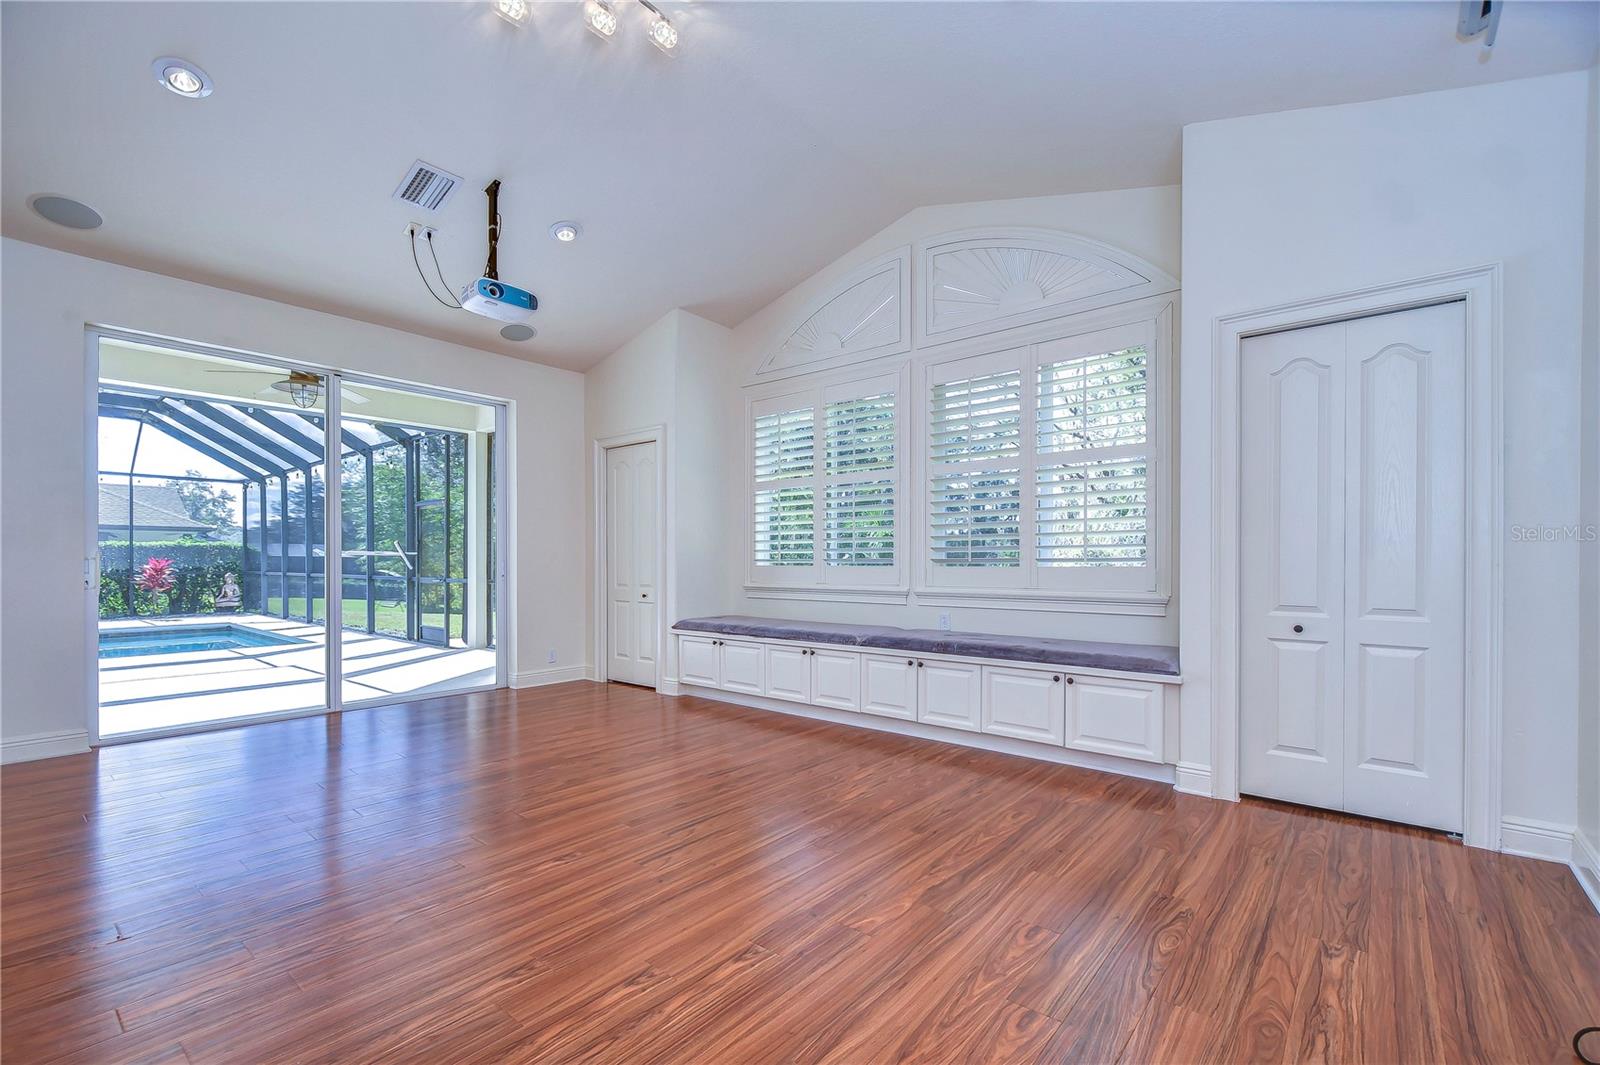 Wood floors, plantation shutters, wide base & crown moulding are just some of the features!